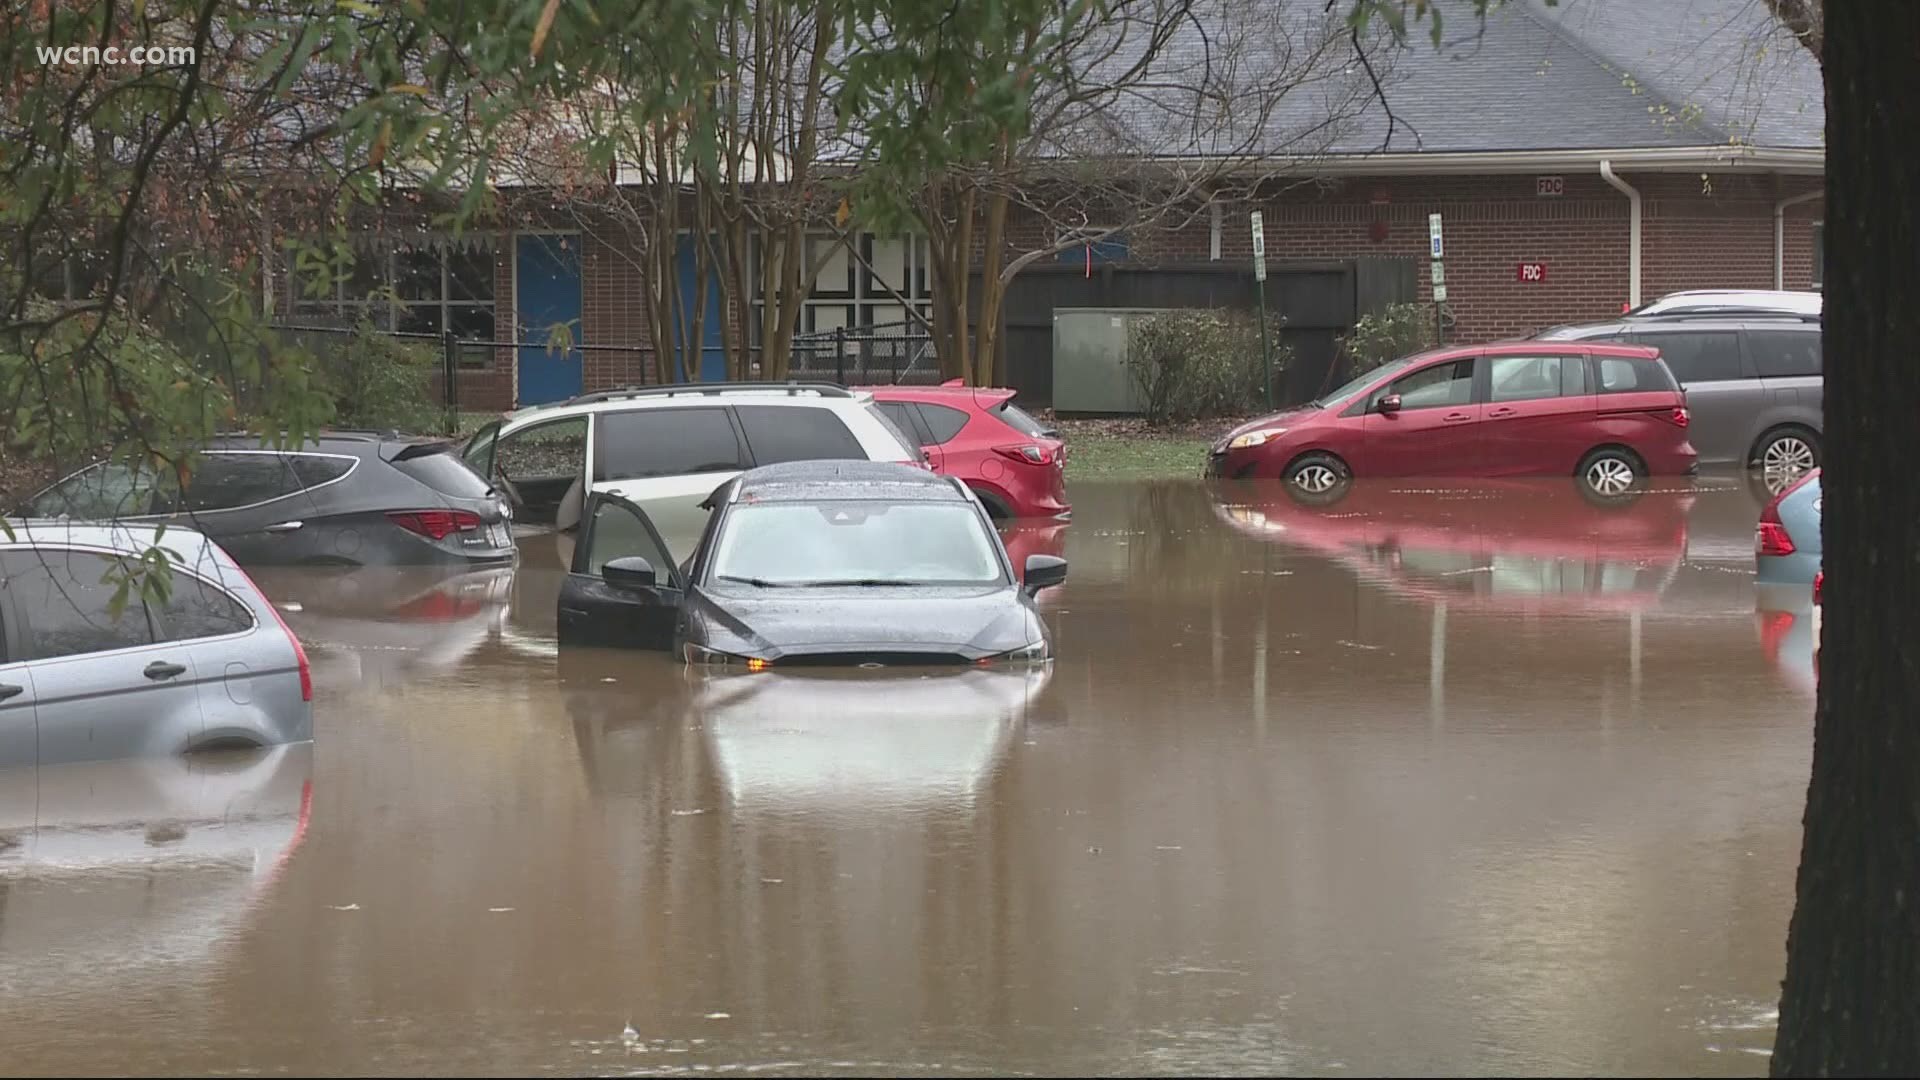 Cars were almost unable to pick up students in the parking lot because of the flood waters.